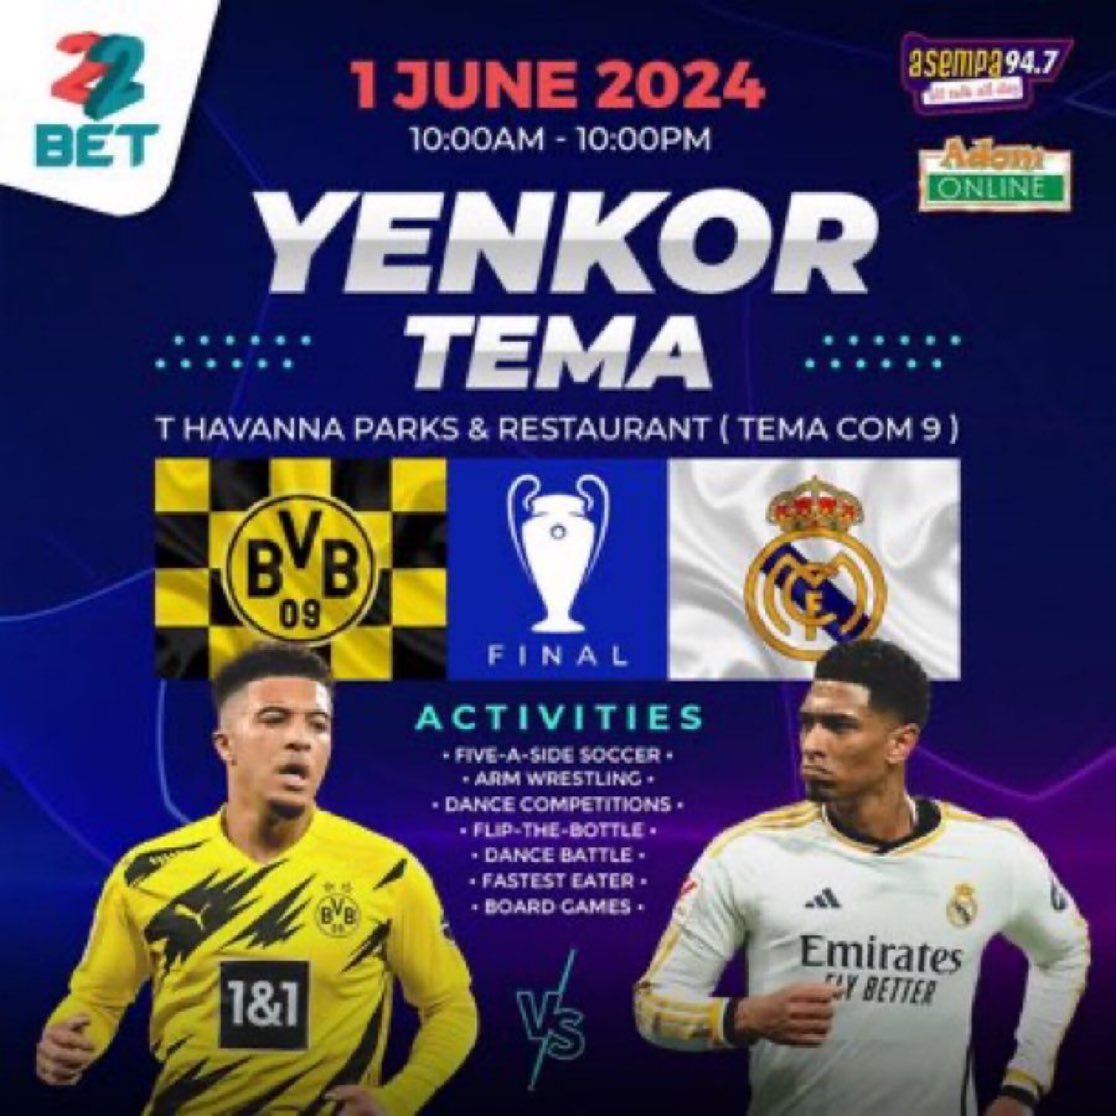 @22bet_ghana is making sure the UCL final is classic on the 1st June 💪
Just come to T Havanna Parks and Restaurant at Tema 💪
#22BetAlwaysPays